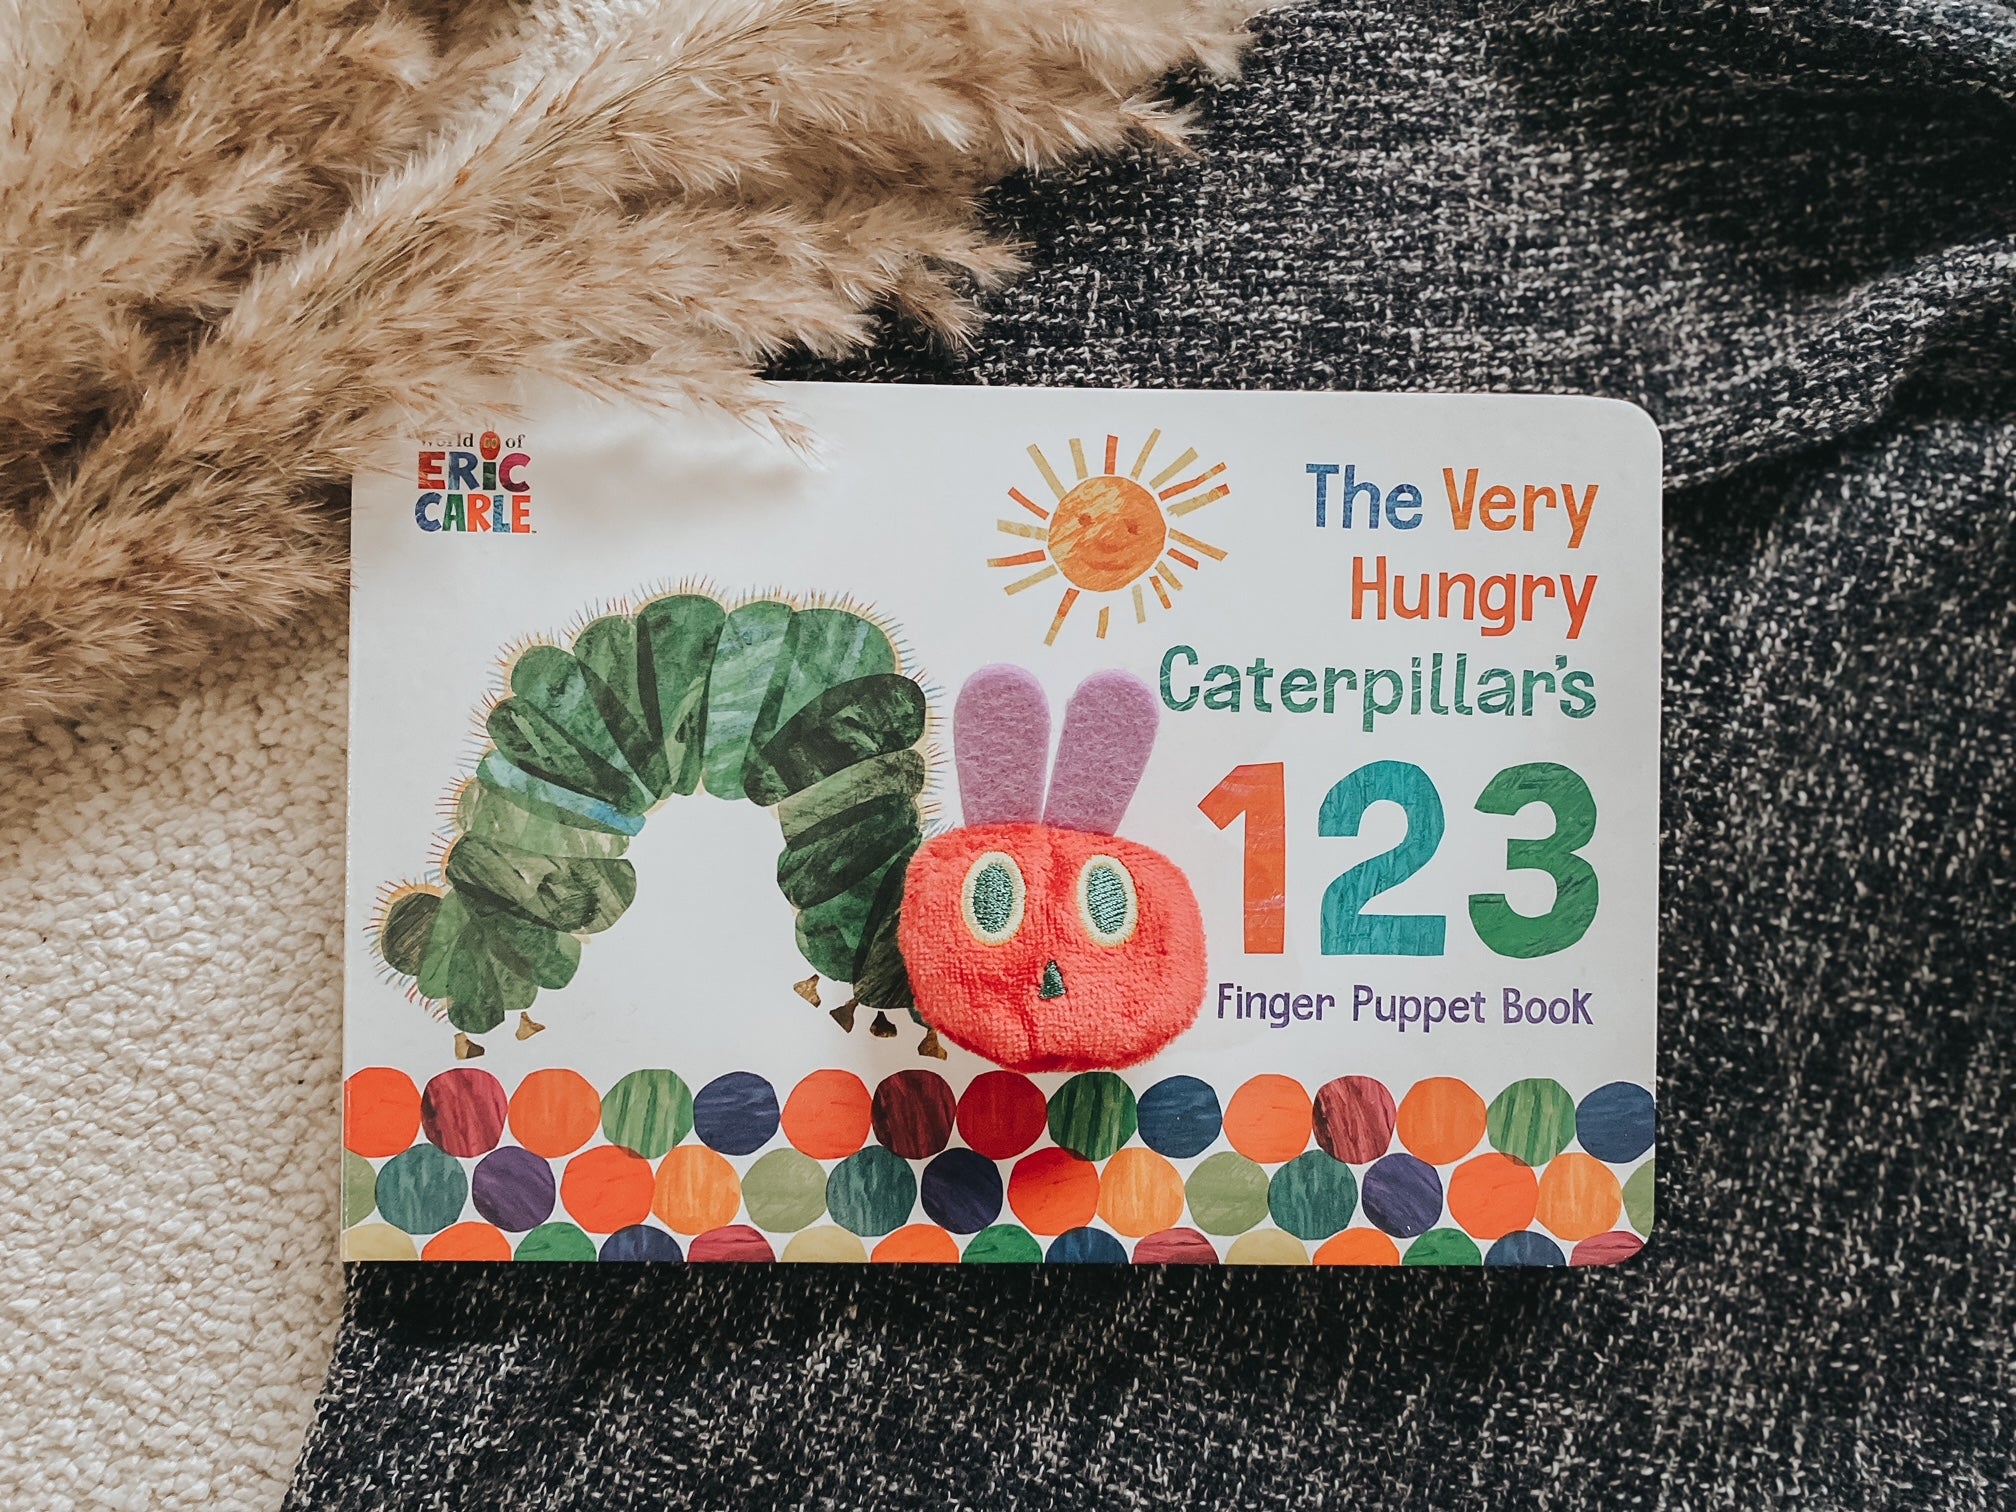 The Very Hungry Caterpillar Finger Puppet Book: 123 Counting Book